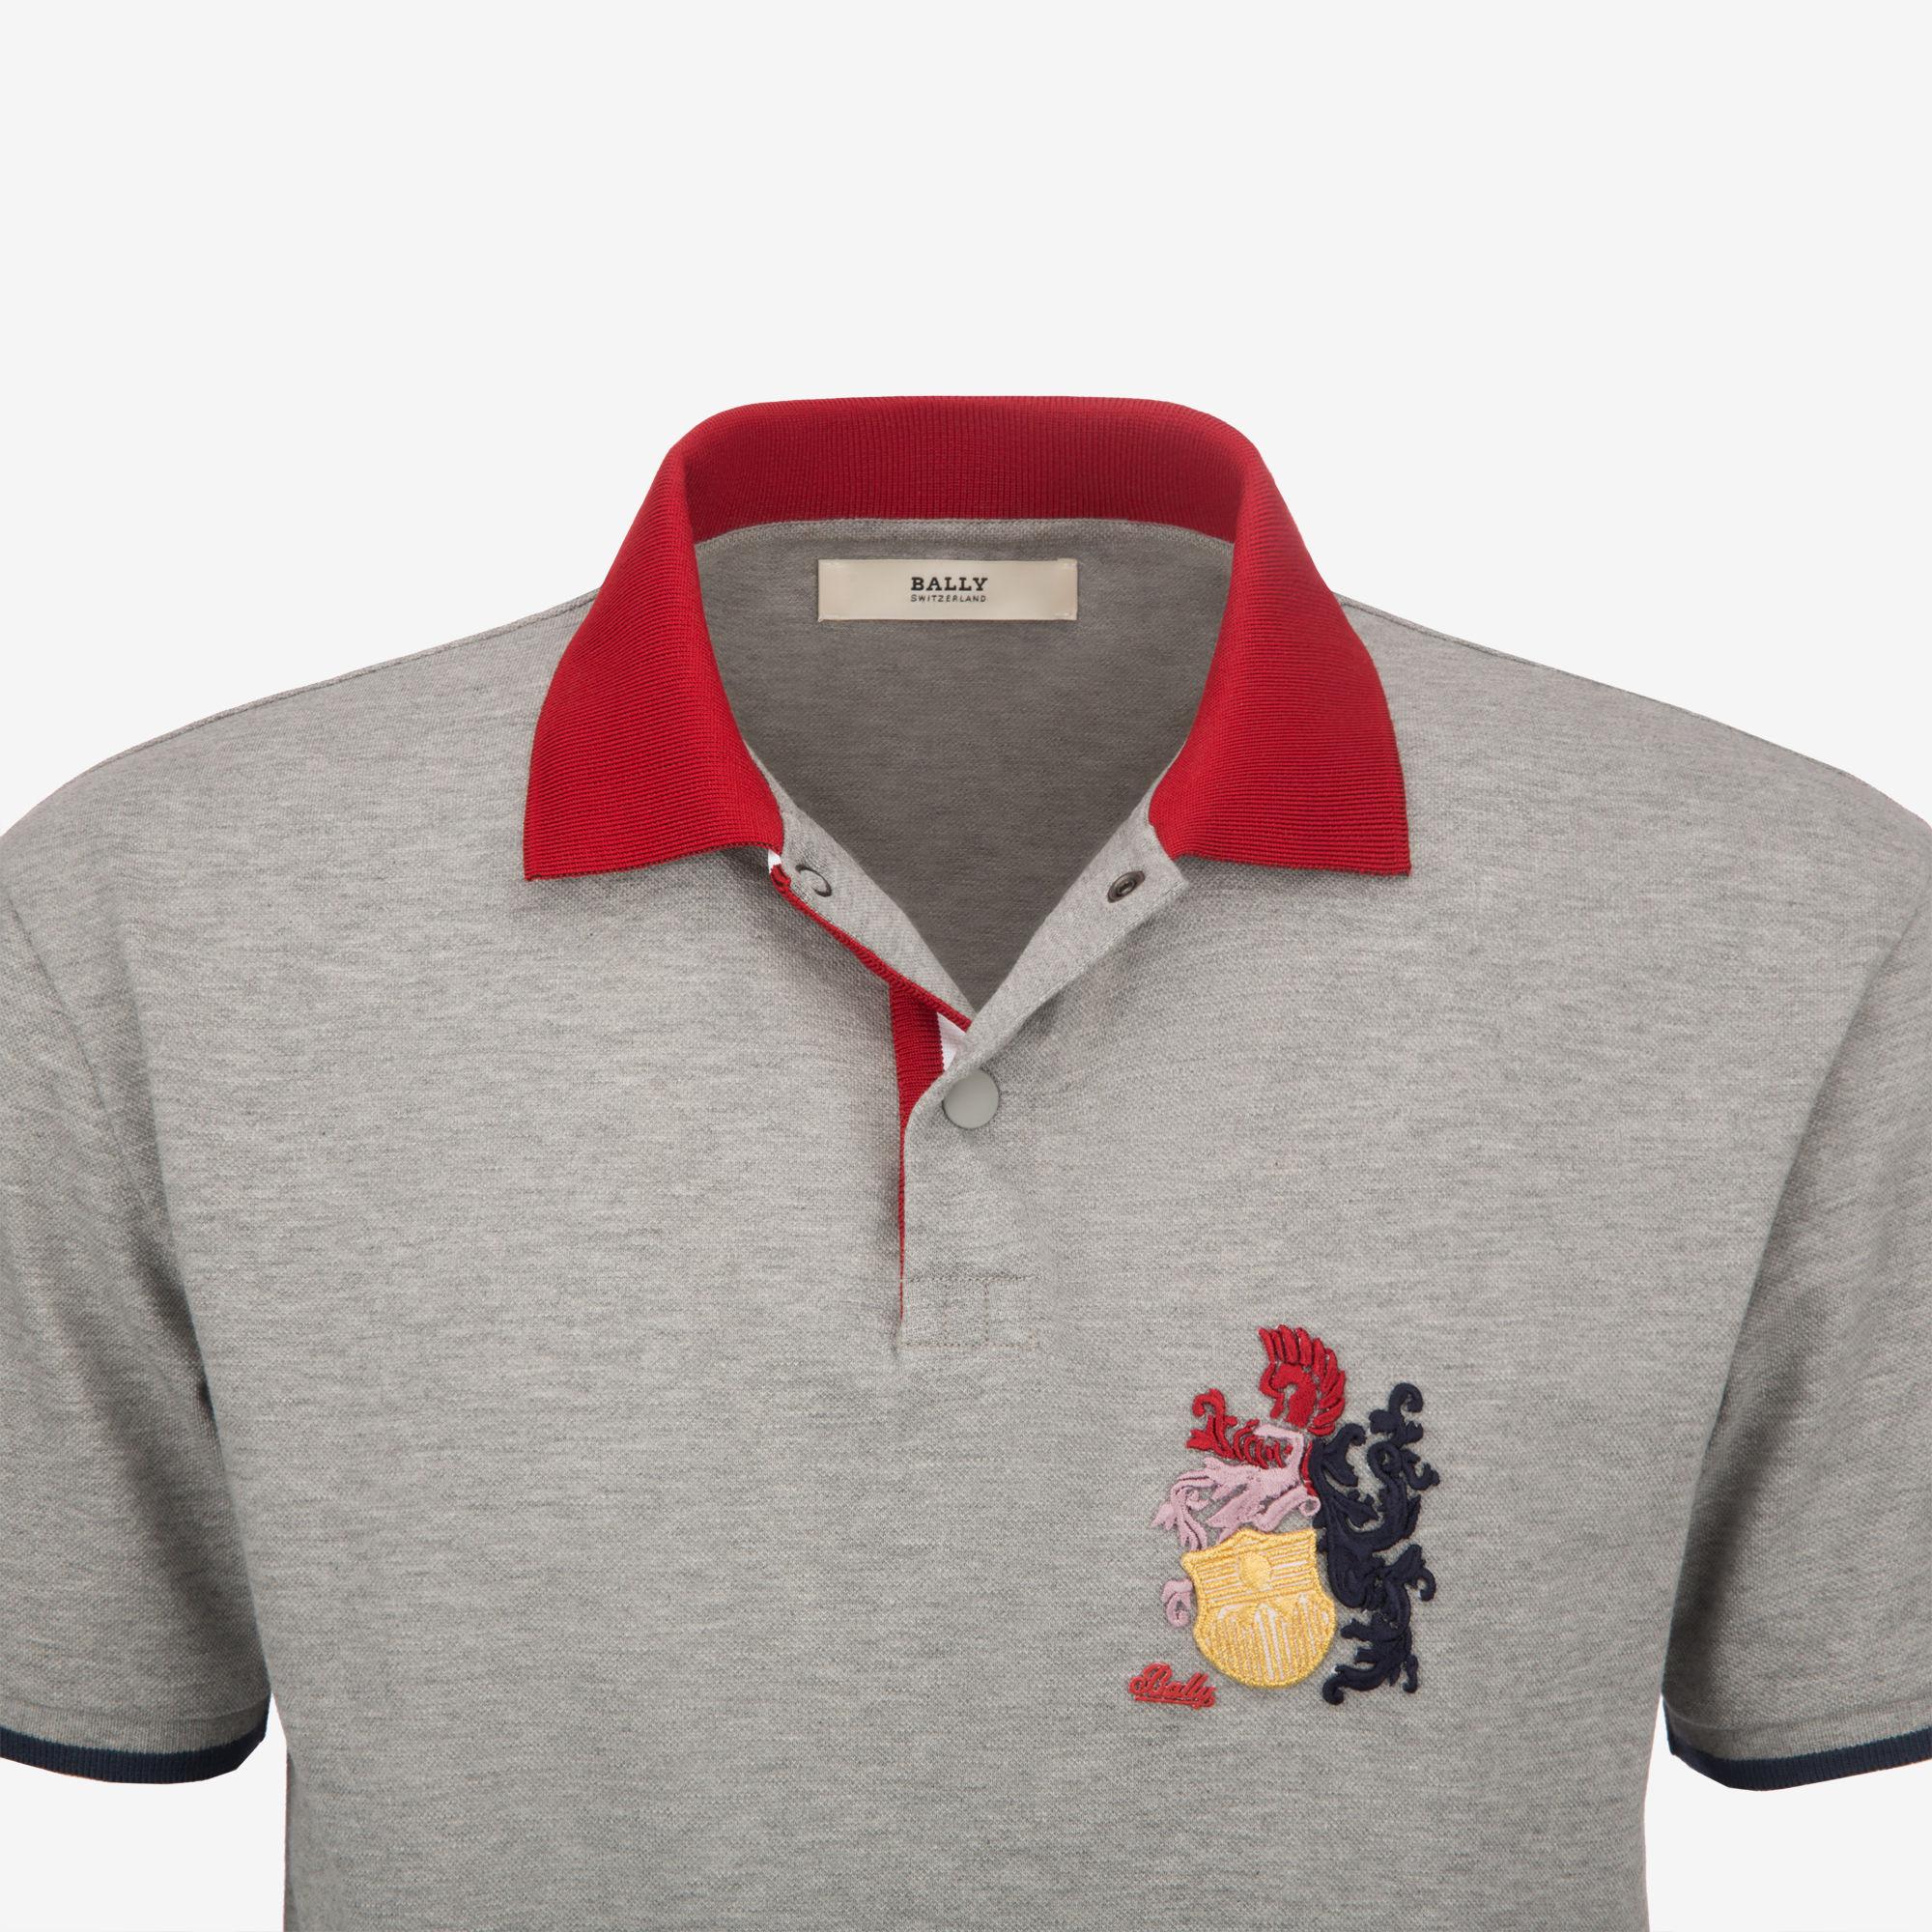 Lyst - Bally Crest Polo Shirt in Gray for Men